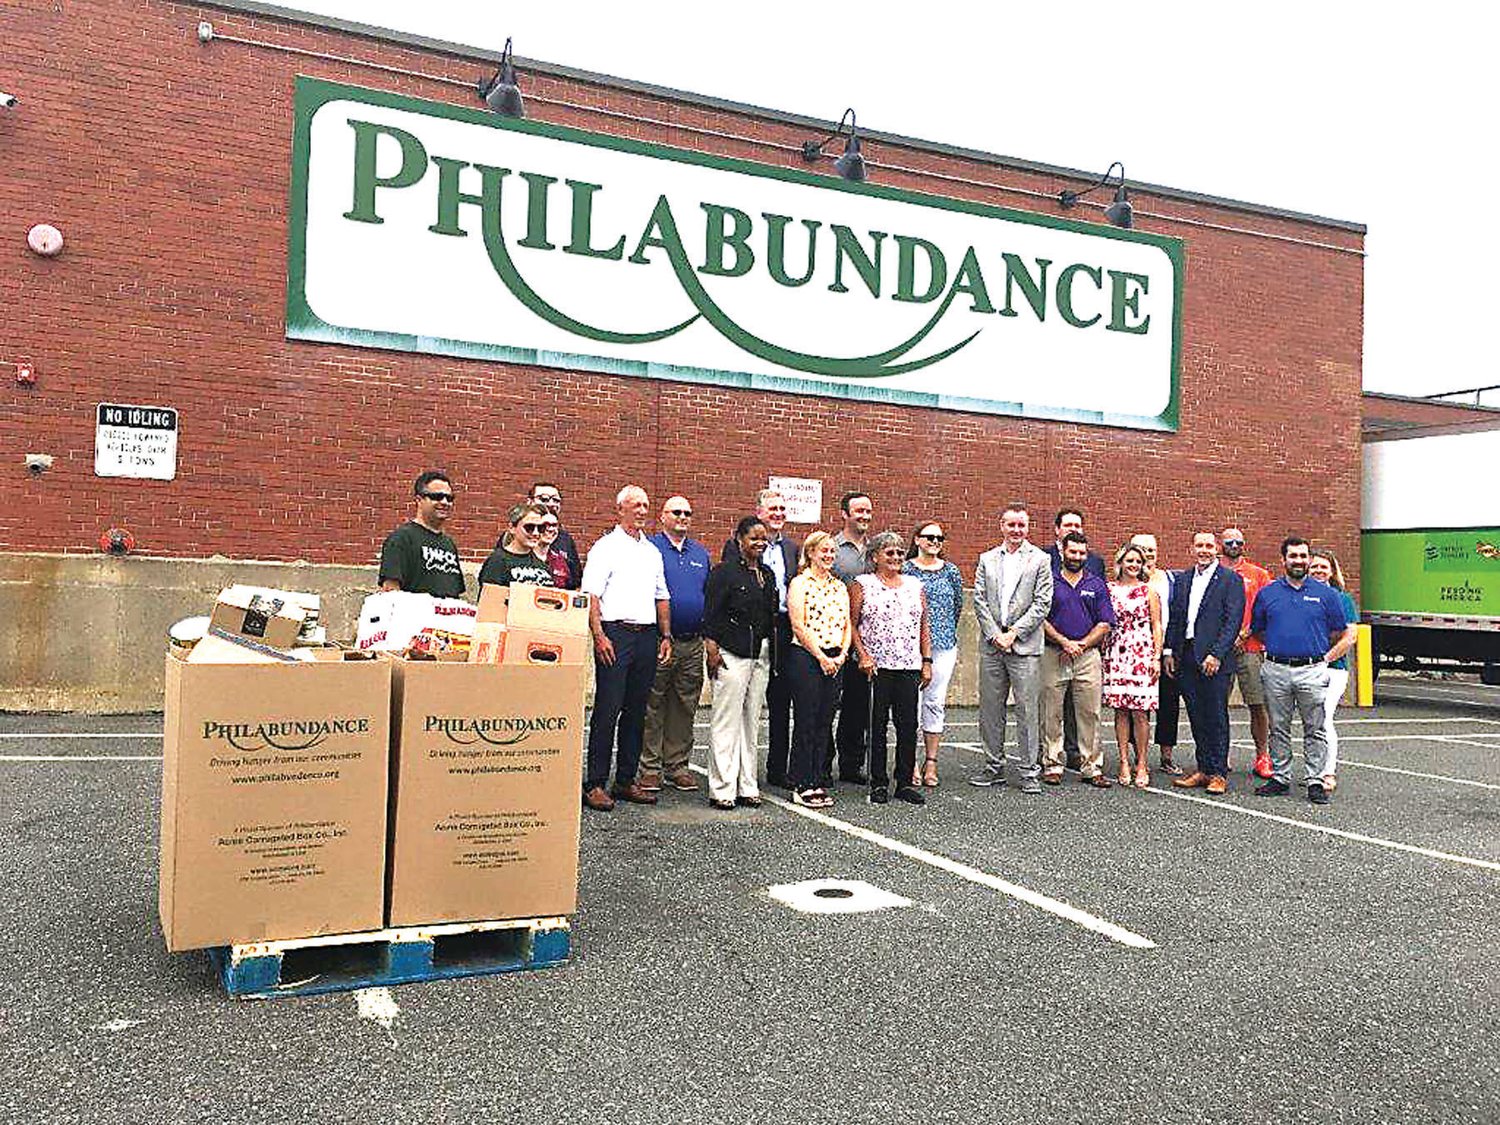 Credit unions and legislators collaborated and launched a food drive this summer and donated 7,380 pounds of canned goods and nonperishable food to Philabundance in South Philadelphia in an effort to replenish the diminishing supply in local pantries.